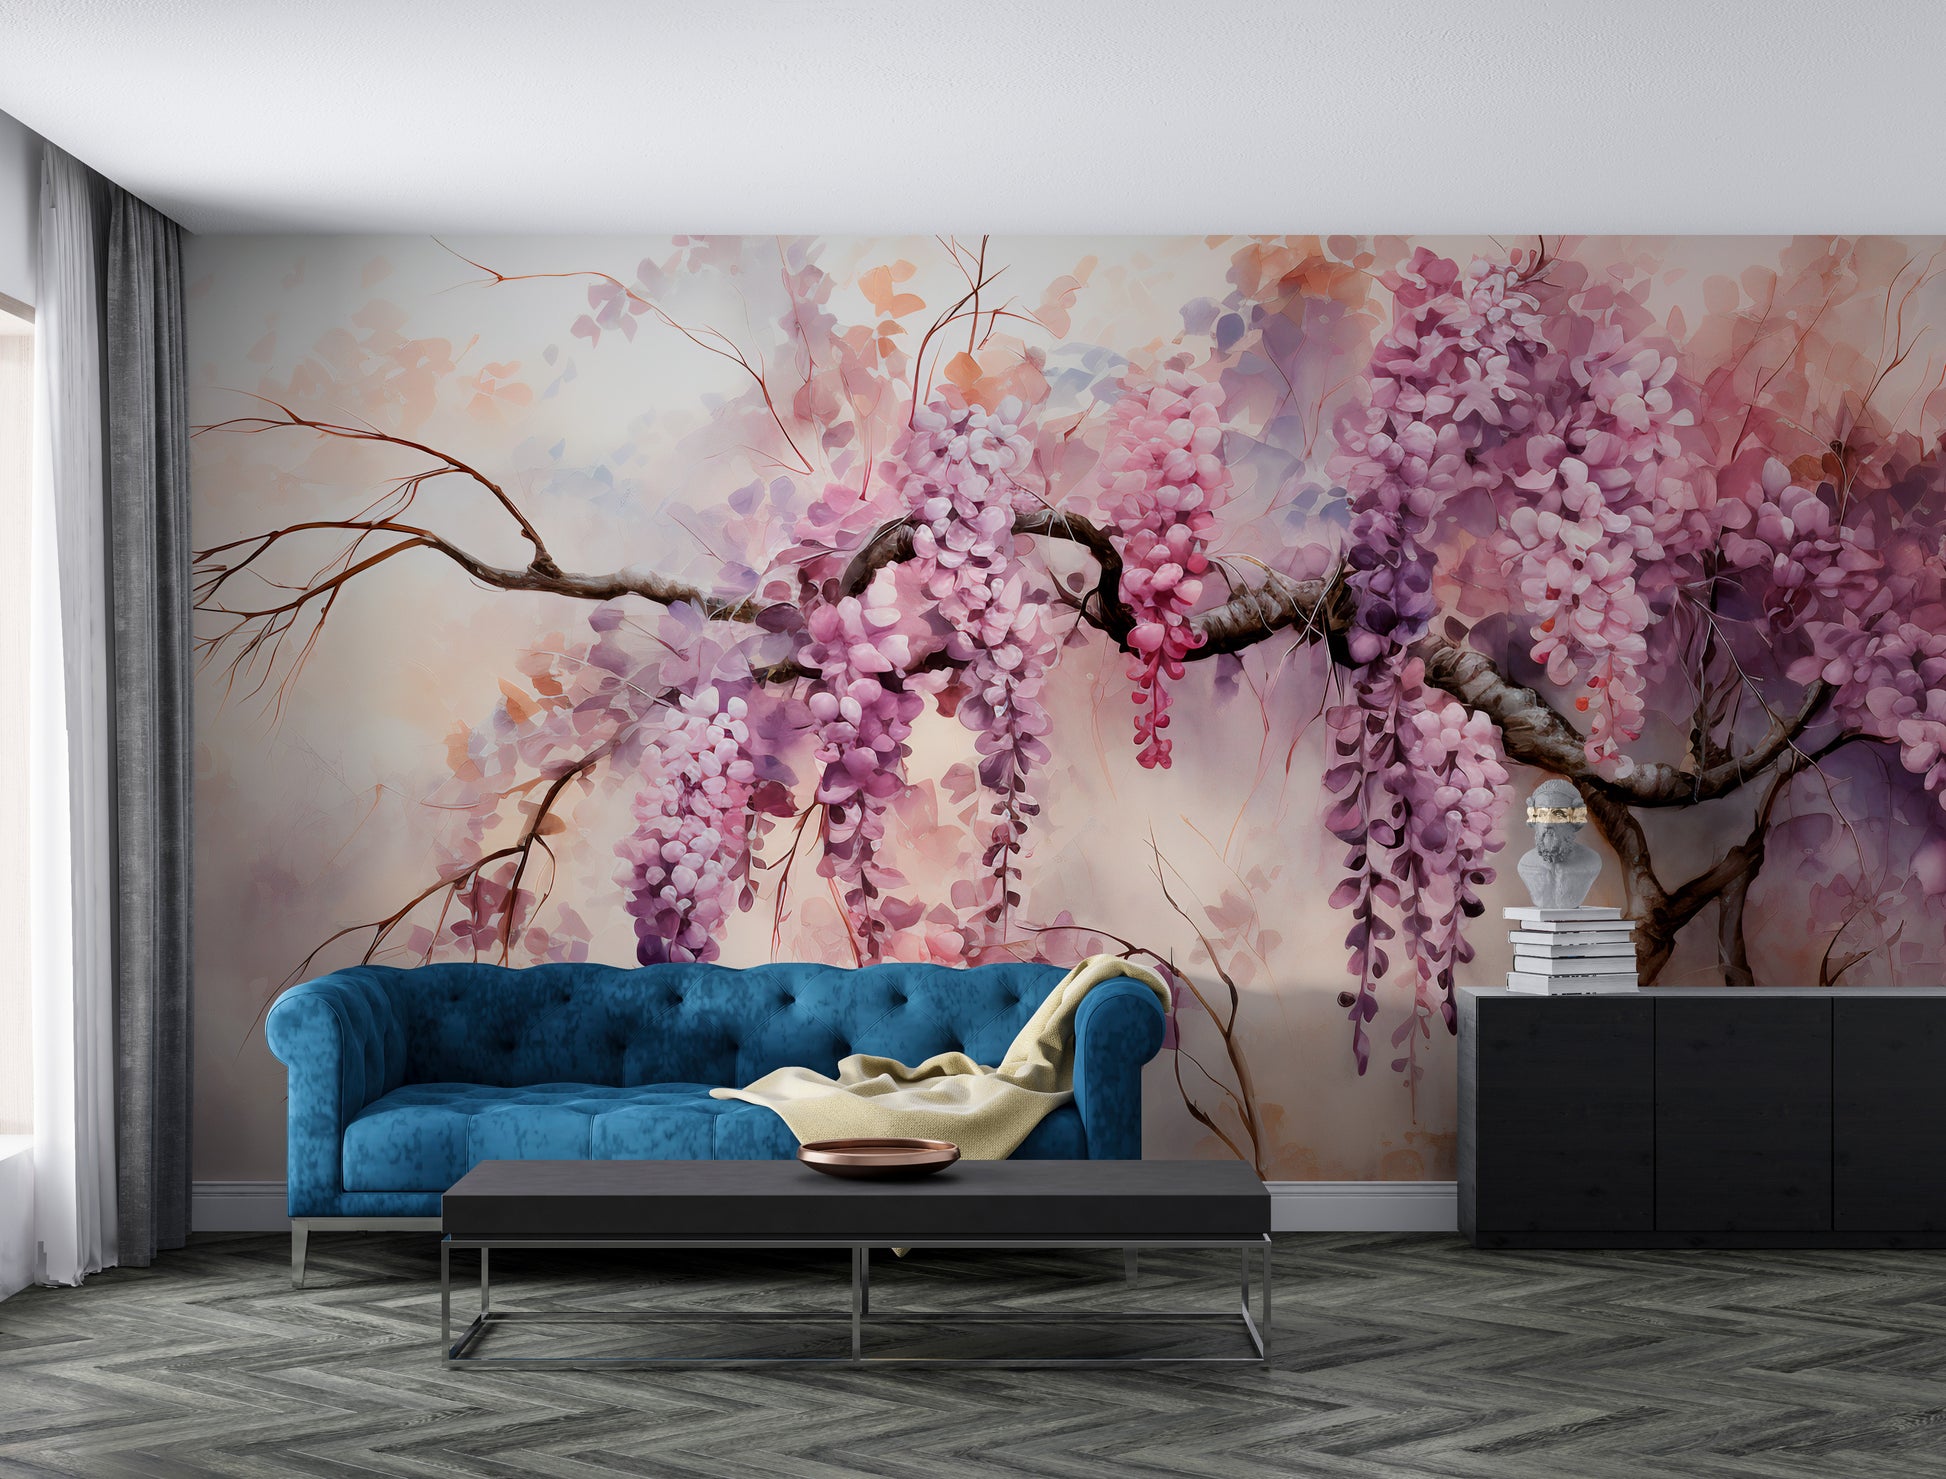 Violet Flowers Mural - Easy and Stunning Wall Decor